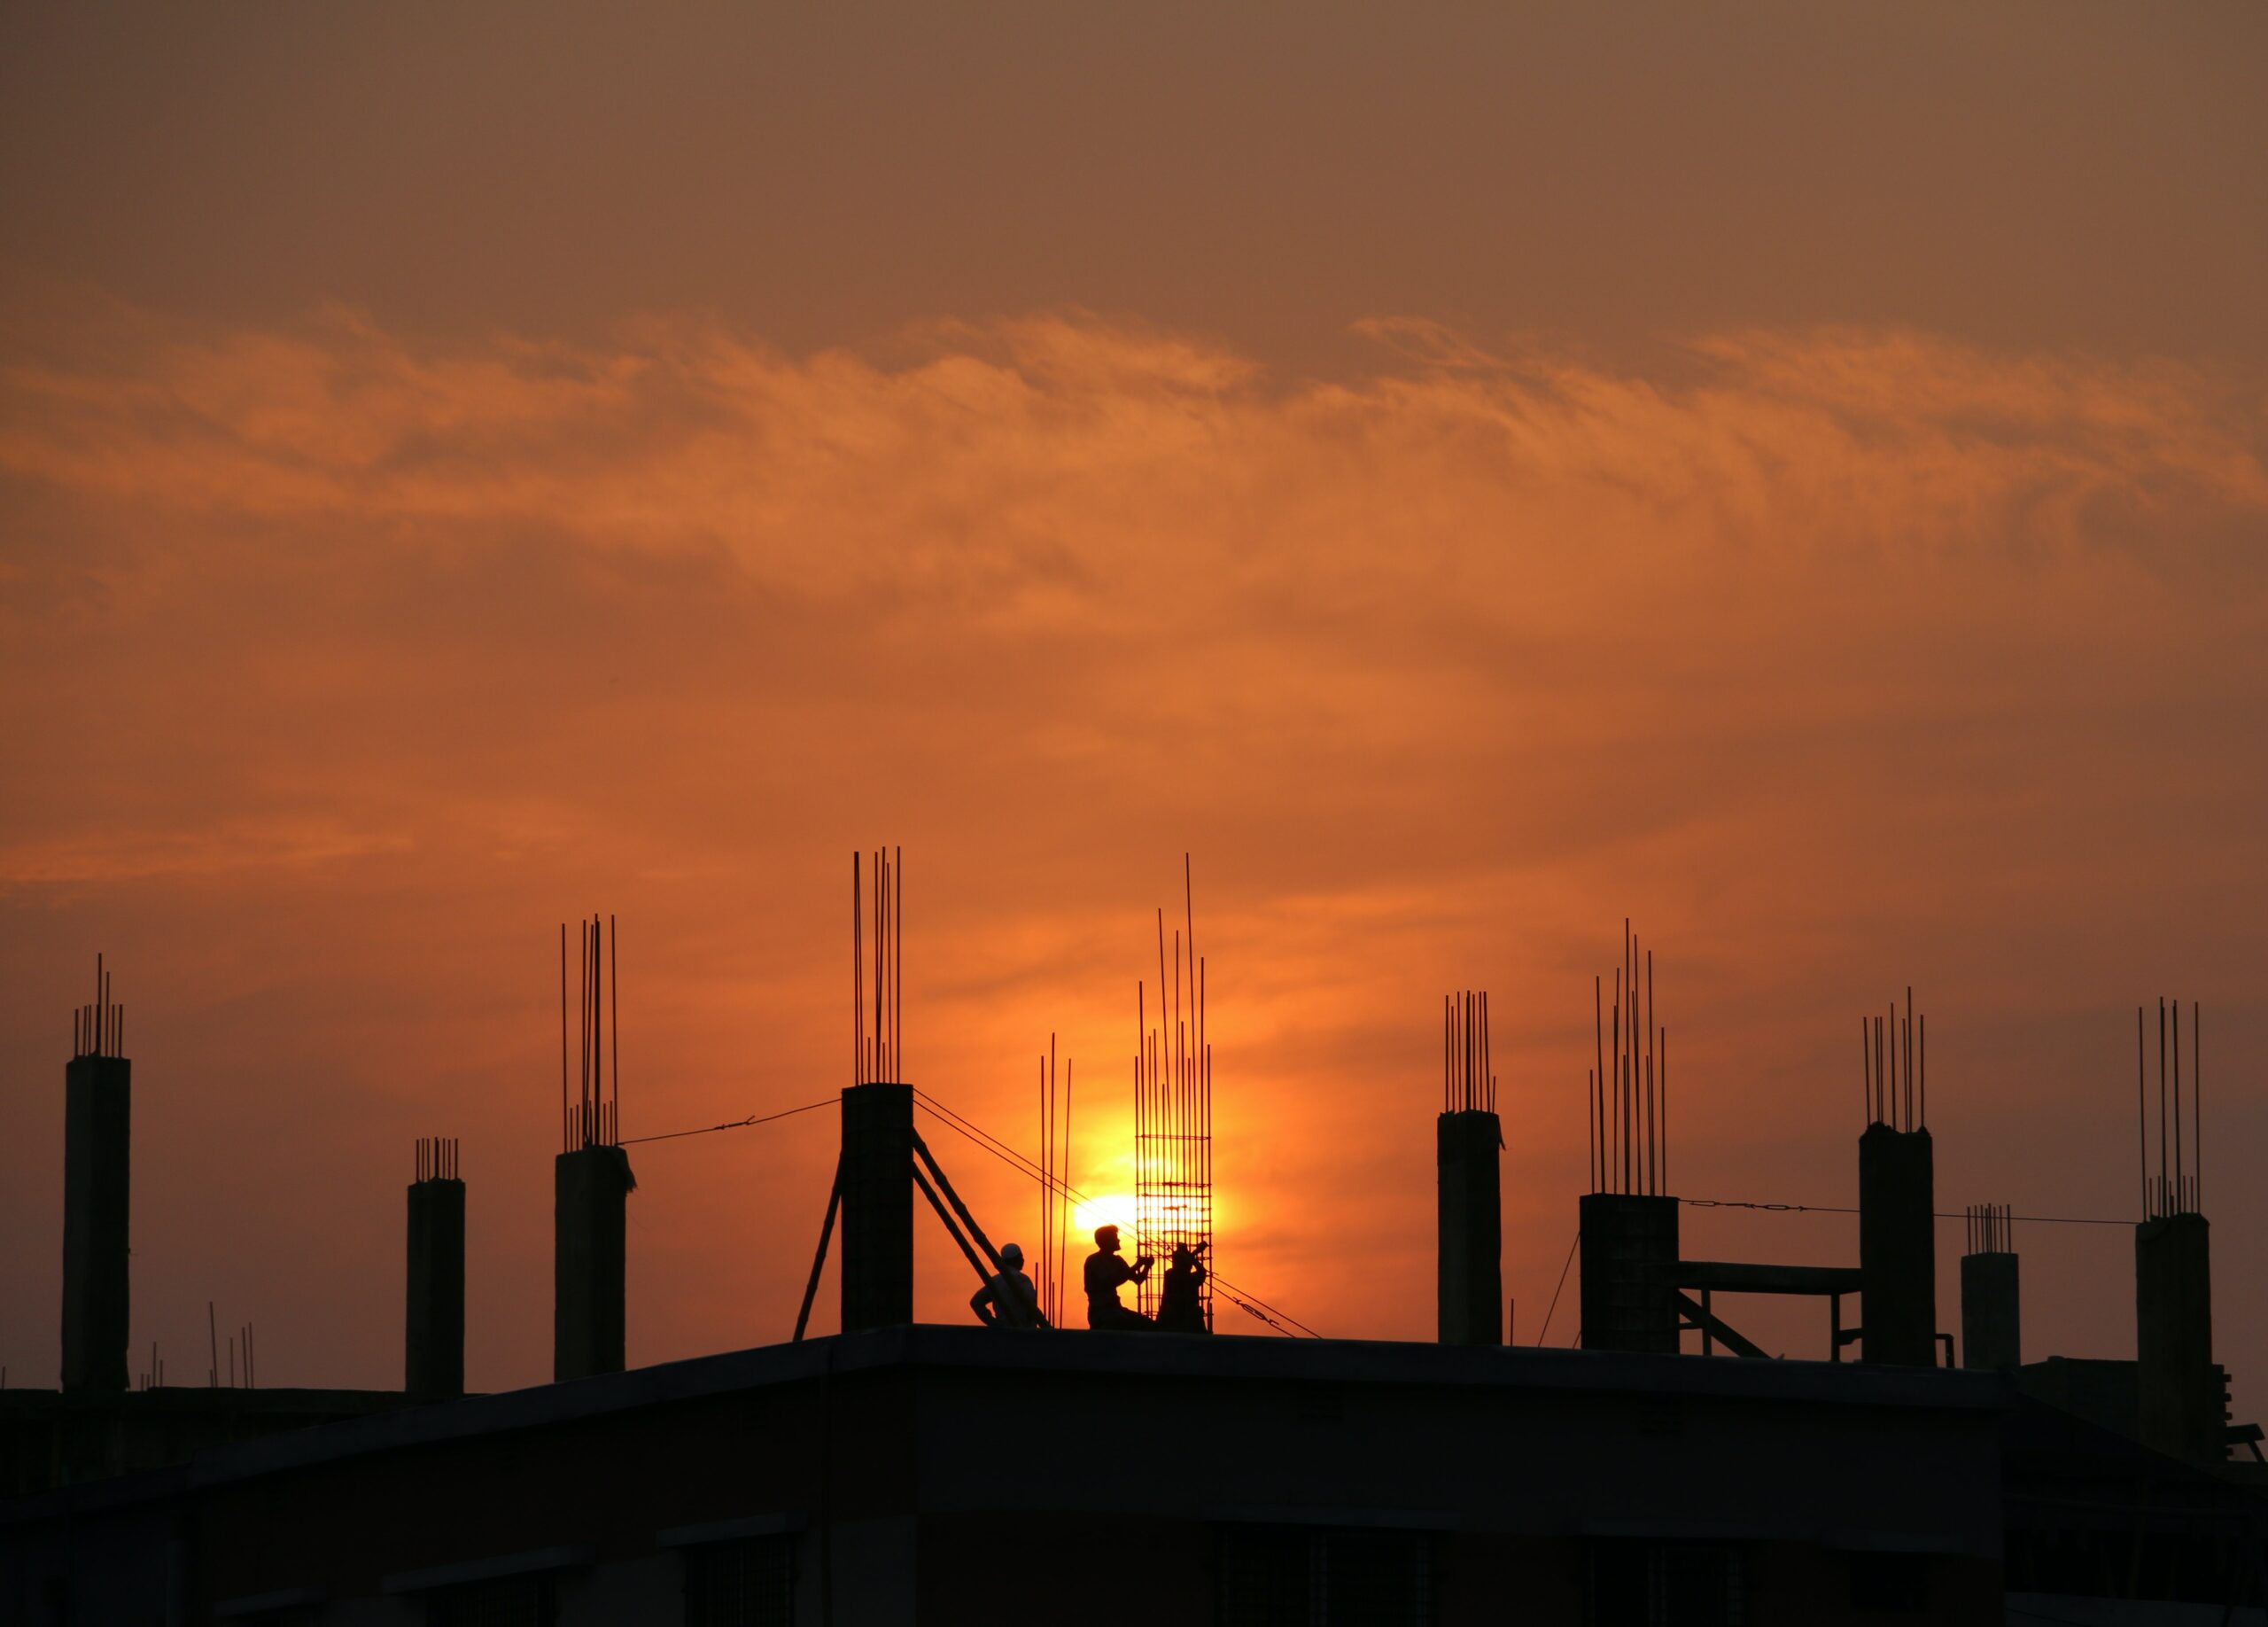 People working on roof with sunset in background